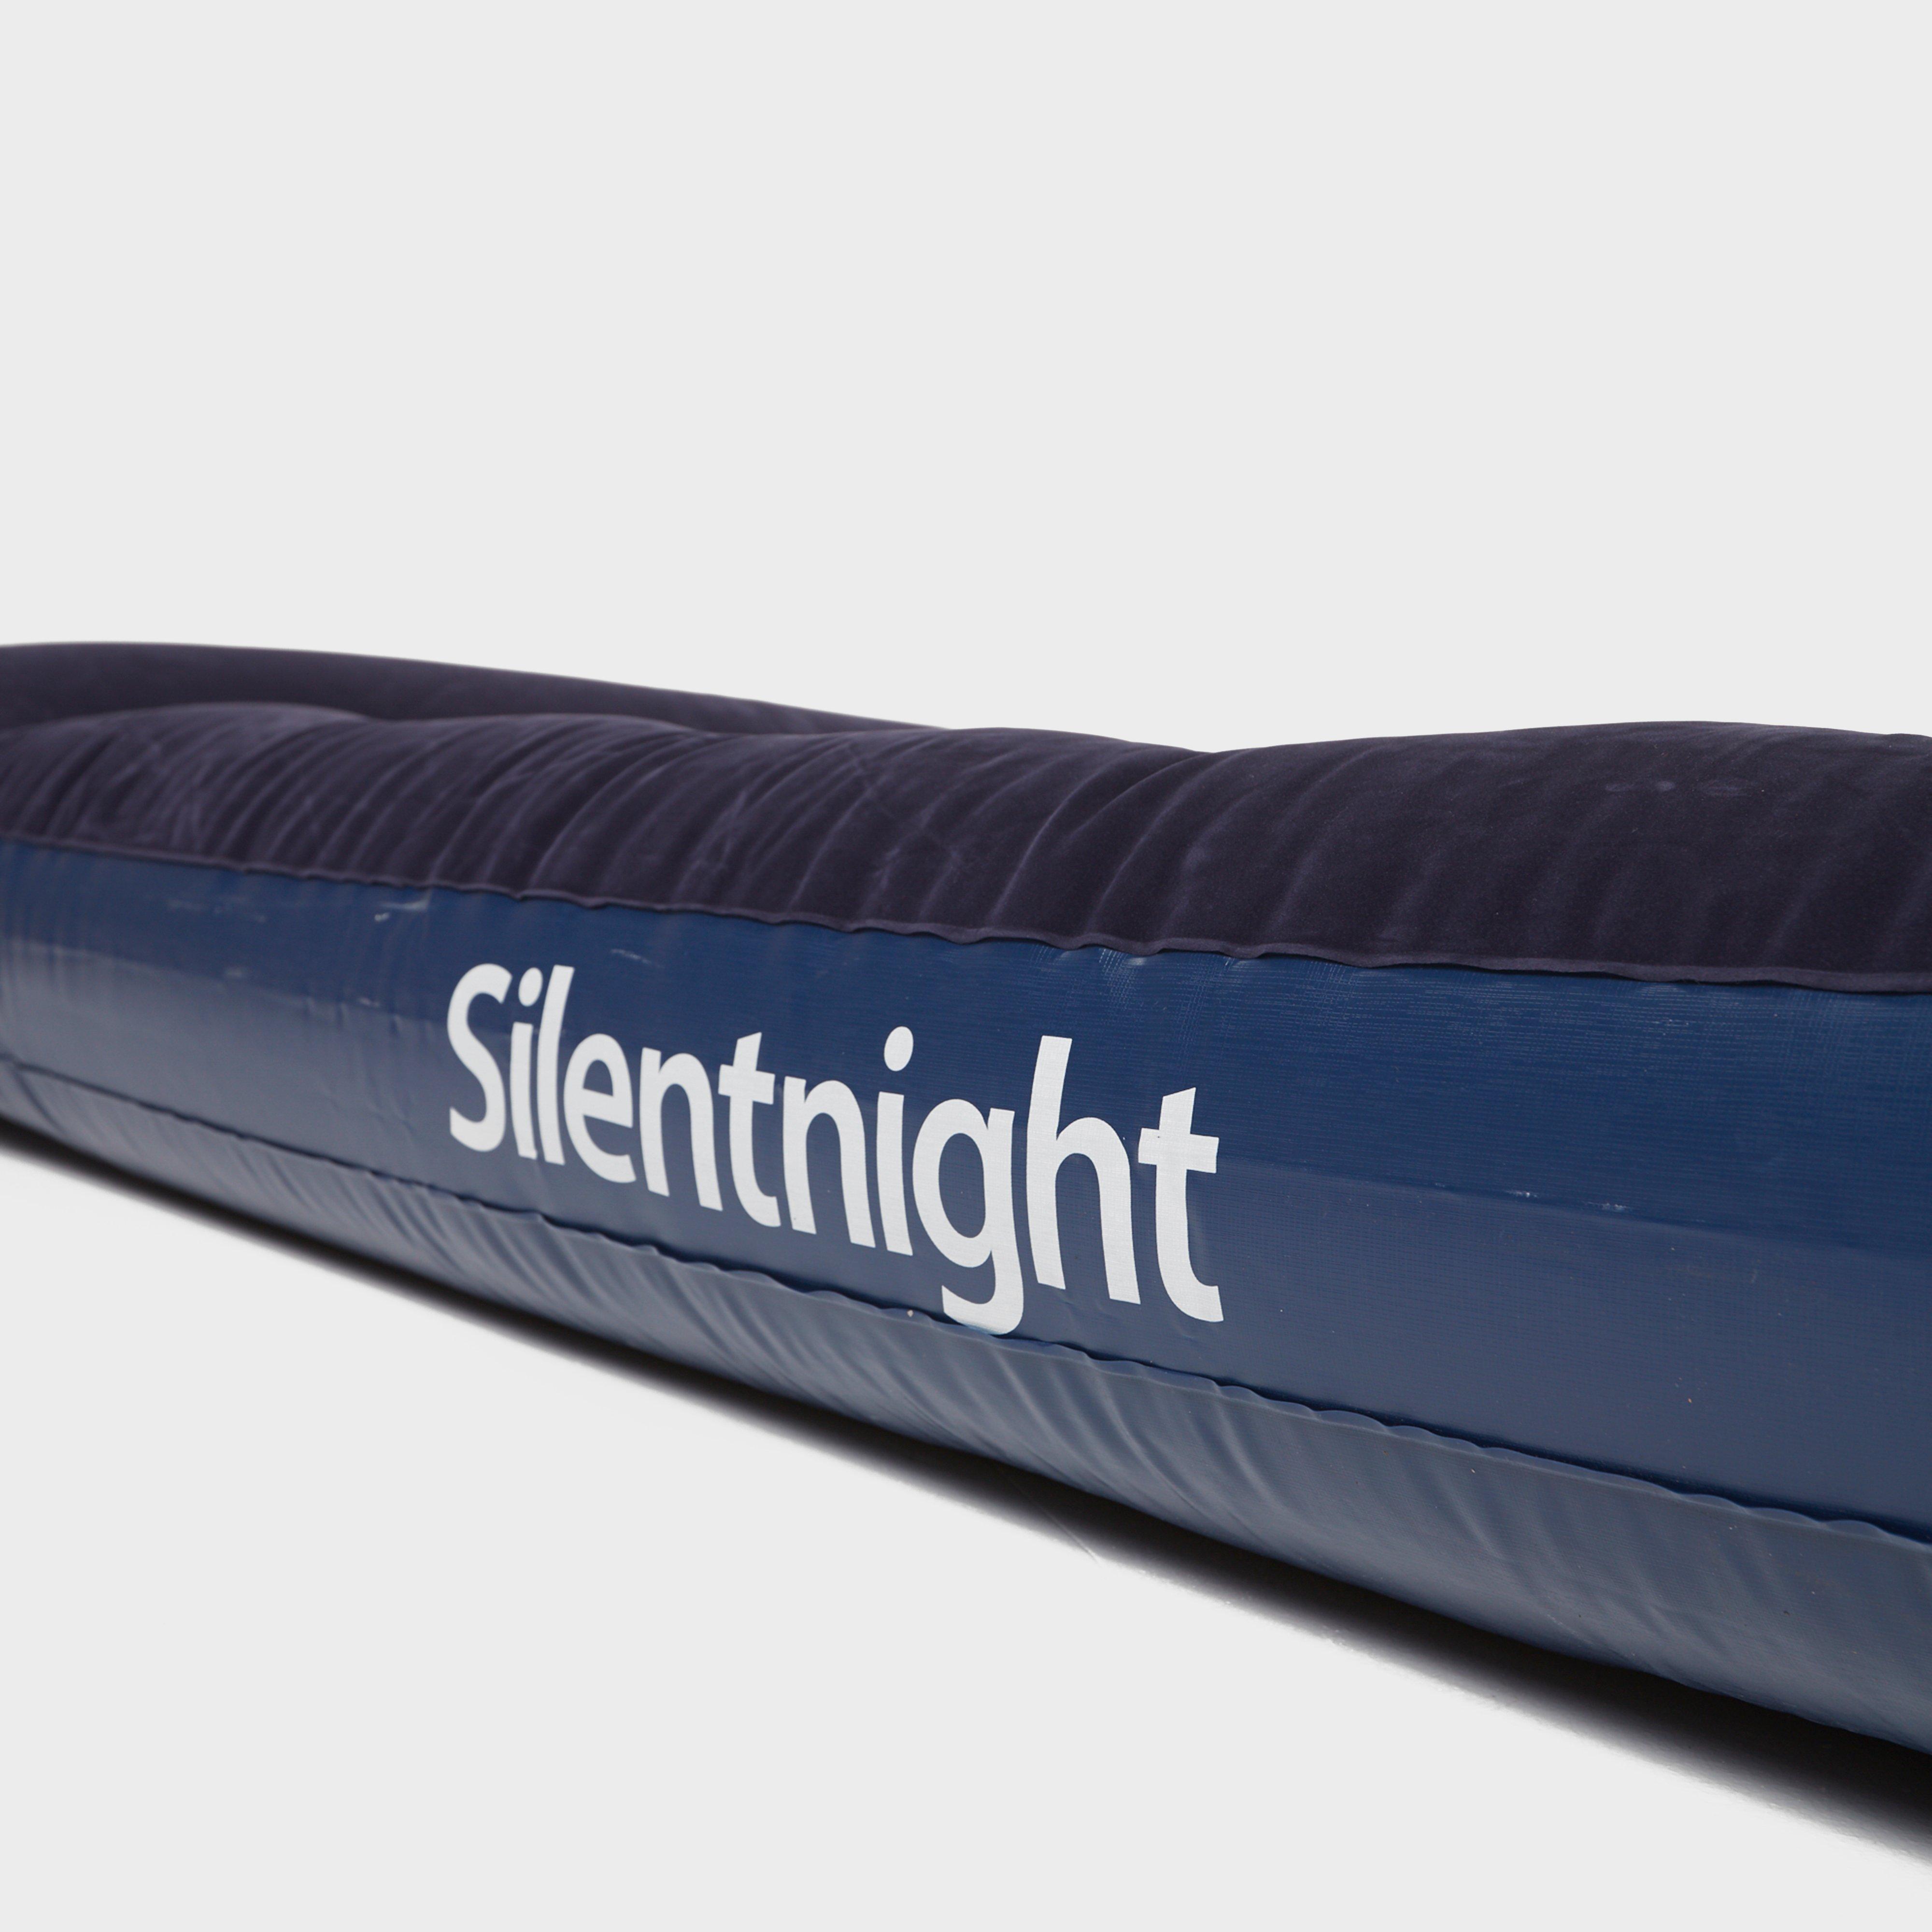 Silentnight Double Flock Pump Airbed Review